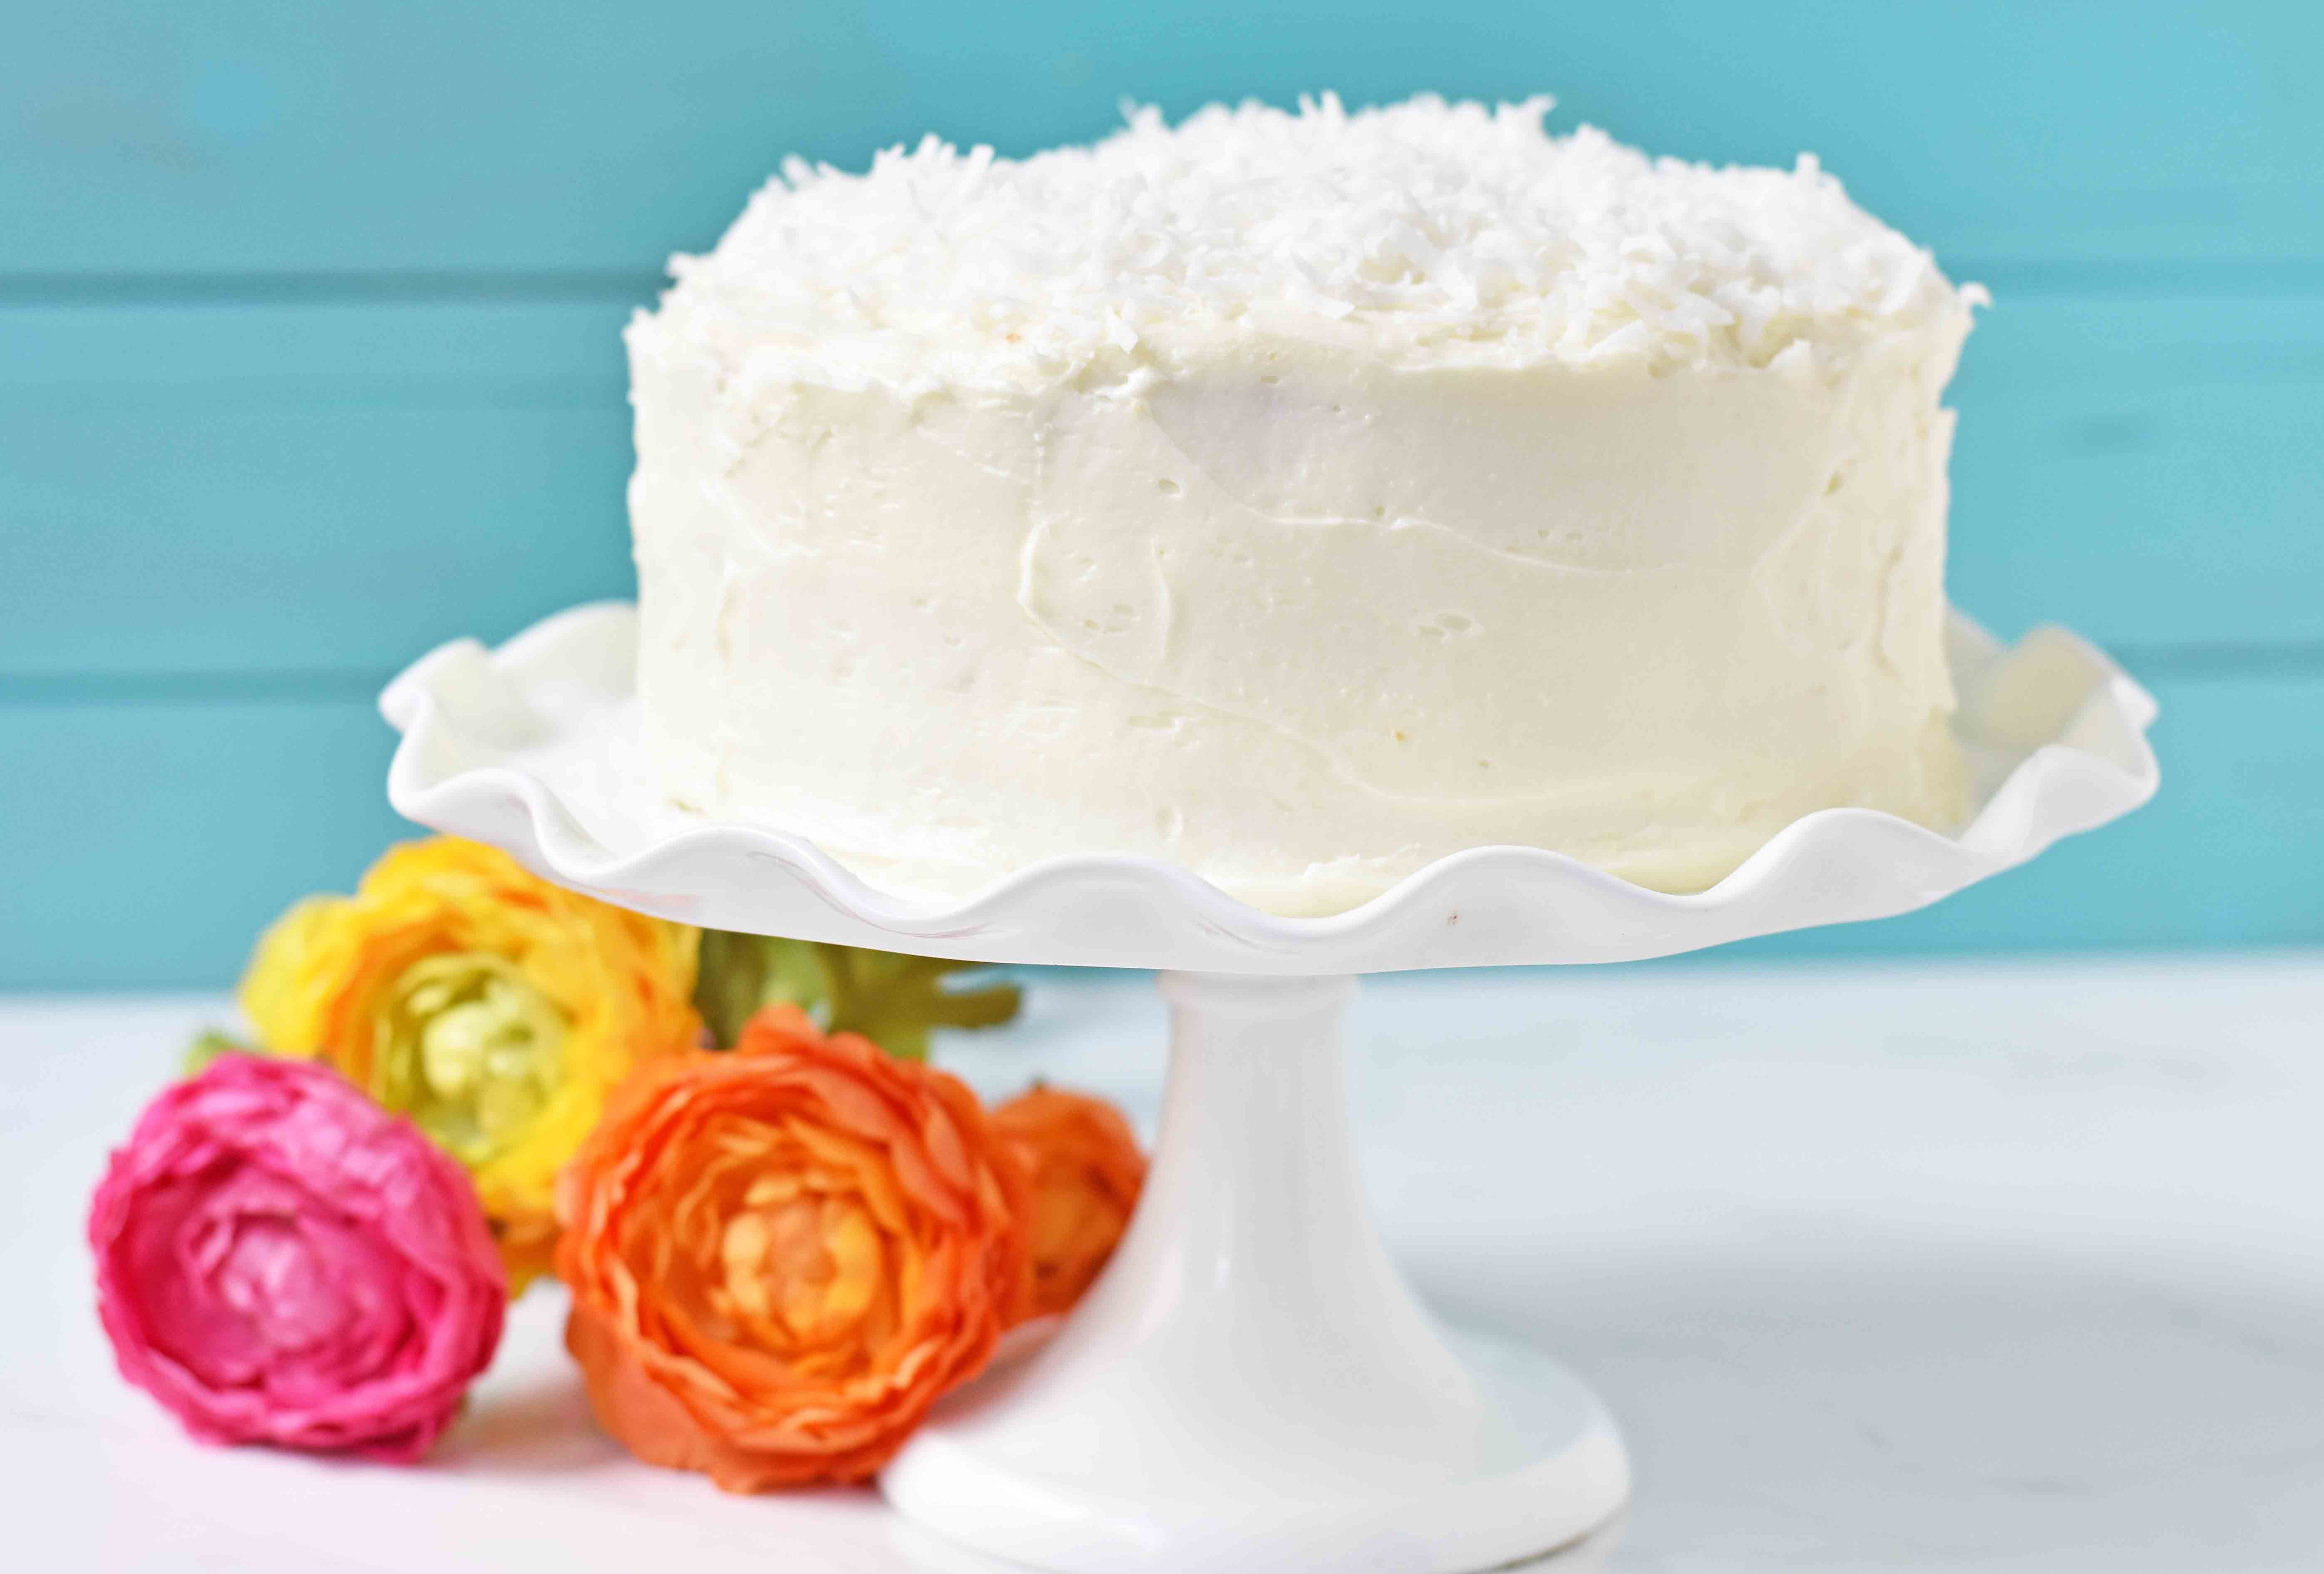 The Best Coconut Cake Recipe. Moist coconut cake with sweet cream cheese frosting. The perfect Southern Coconut Cake Recipe. www.modernhoney.com